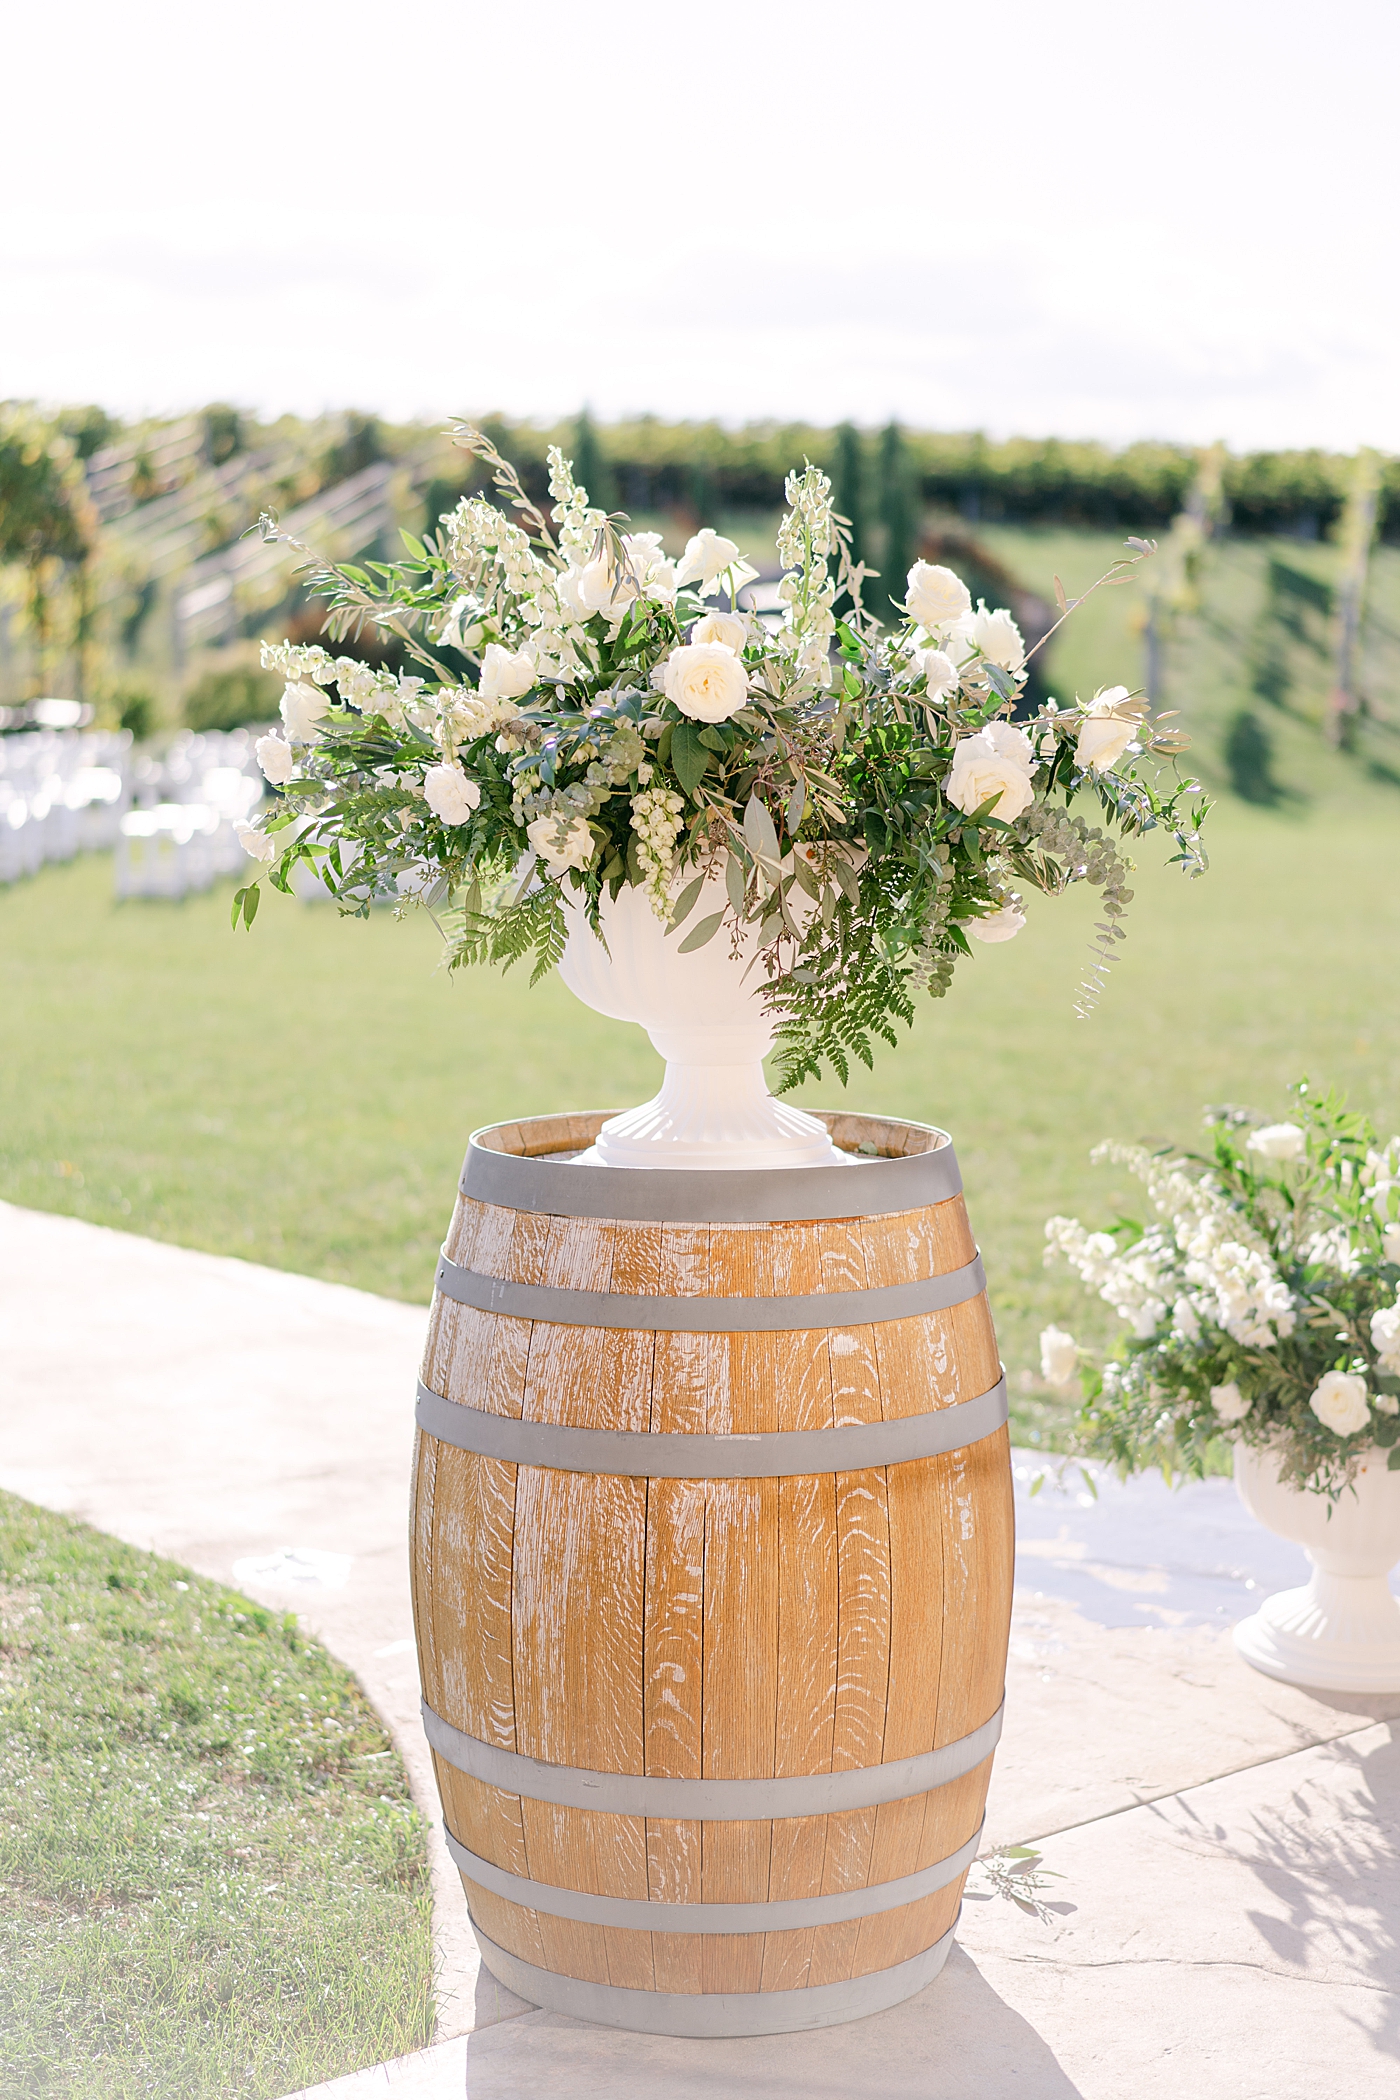 White wedding flowers on a wine barrel | Photo by Hope Helmuth Photography